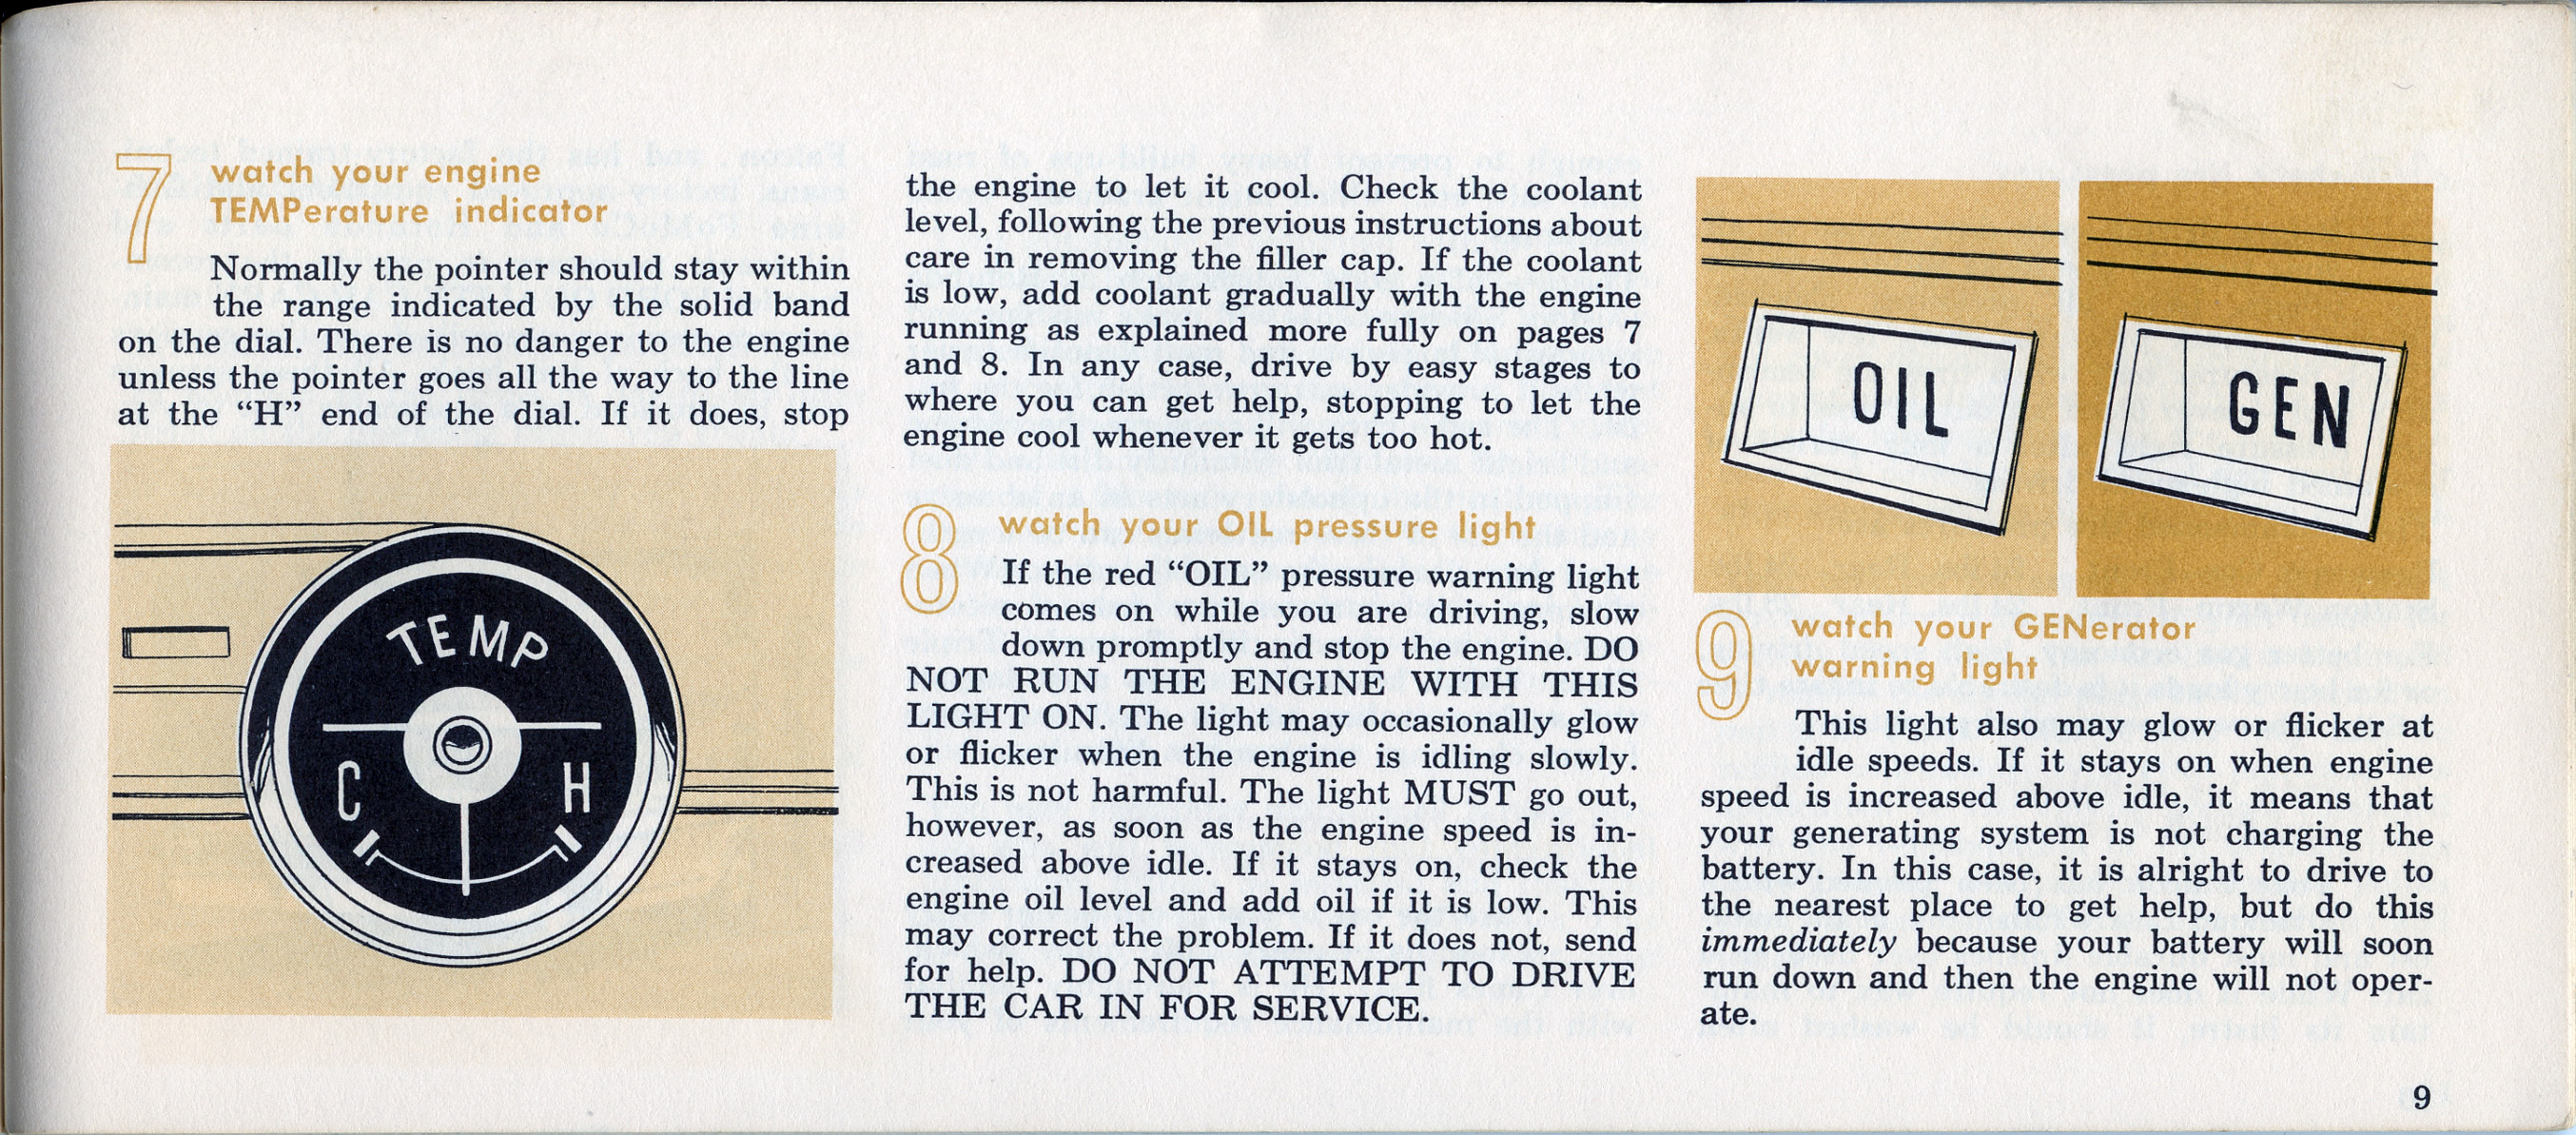 1964 Ford Falcon Owners Manual Page 38